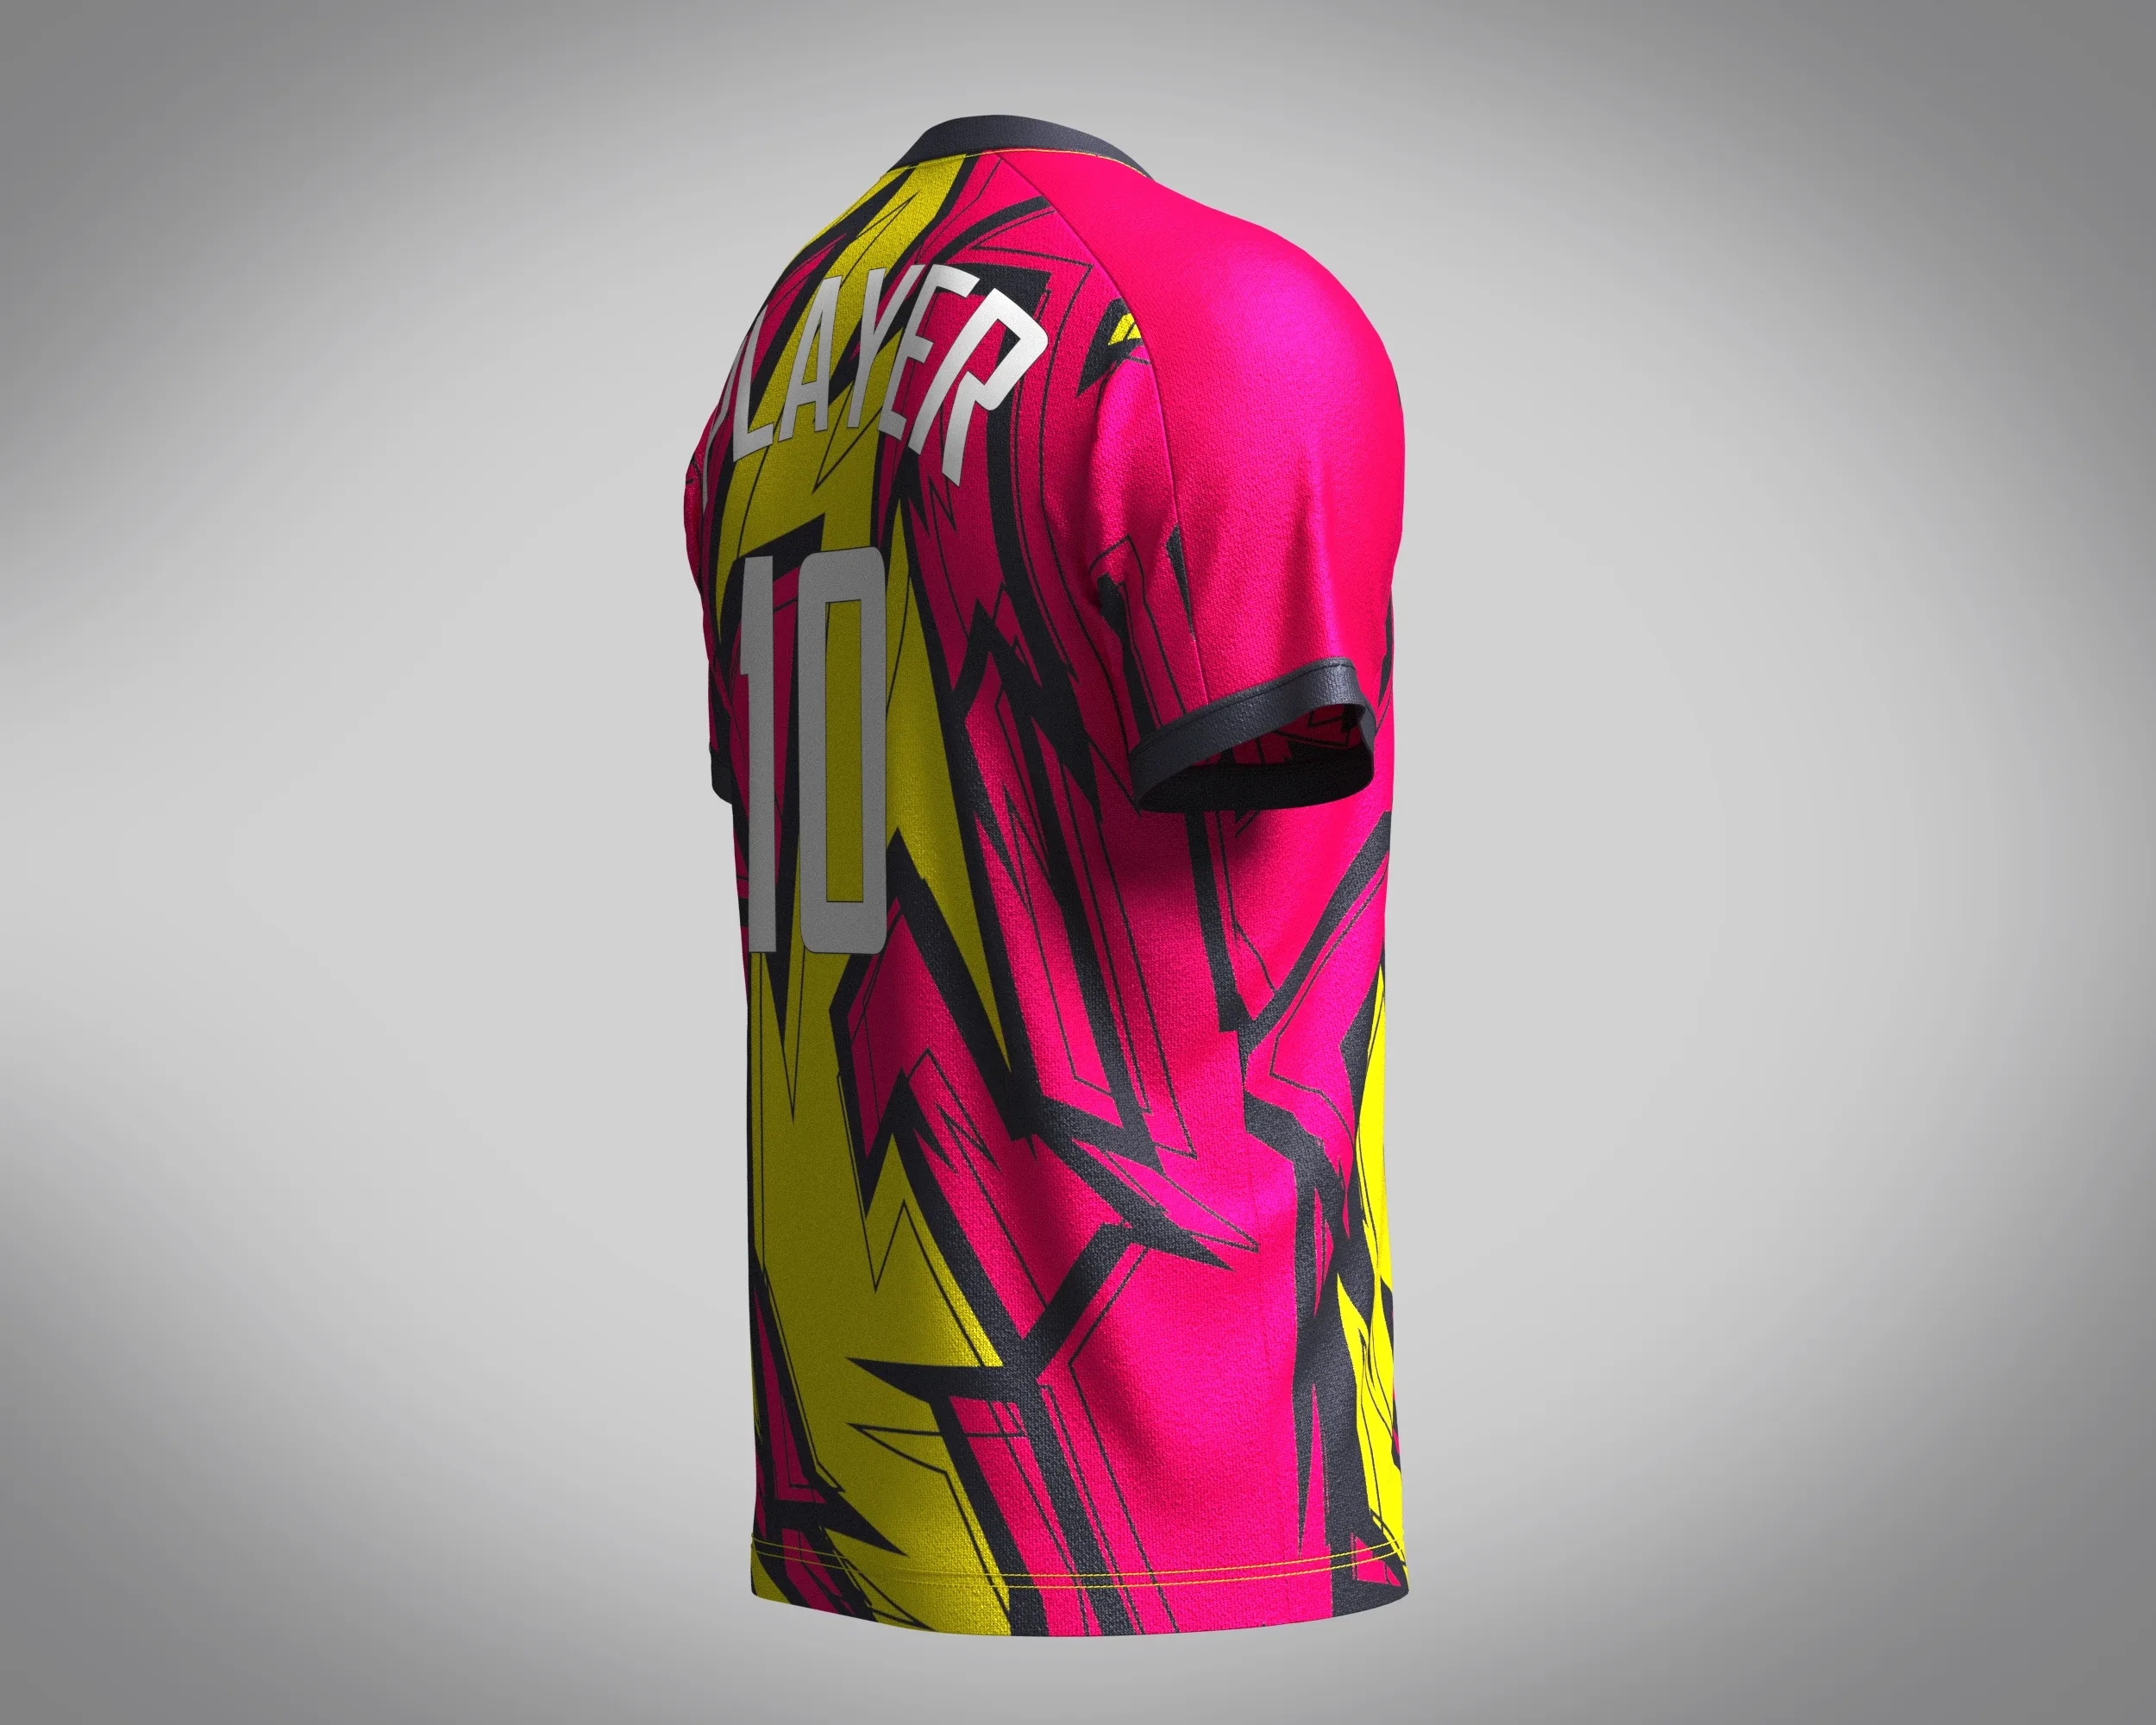 Mens Soccer Hot Pink and Yellow Jersey Player-10 | Marvelous / Clo3d / obj / fbx